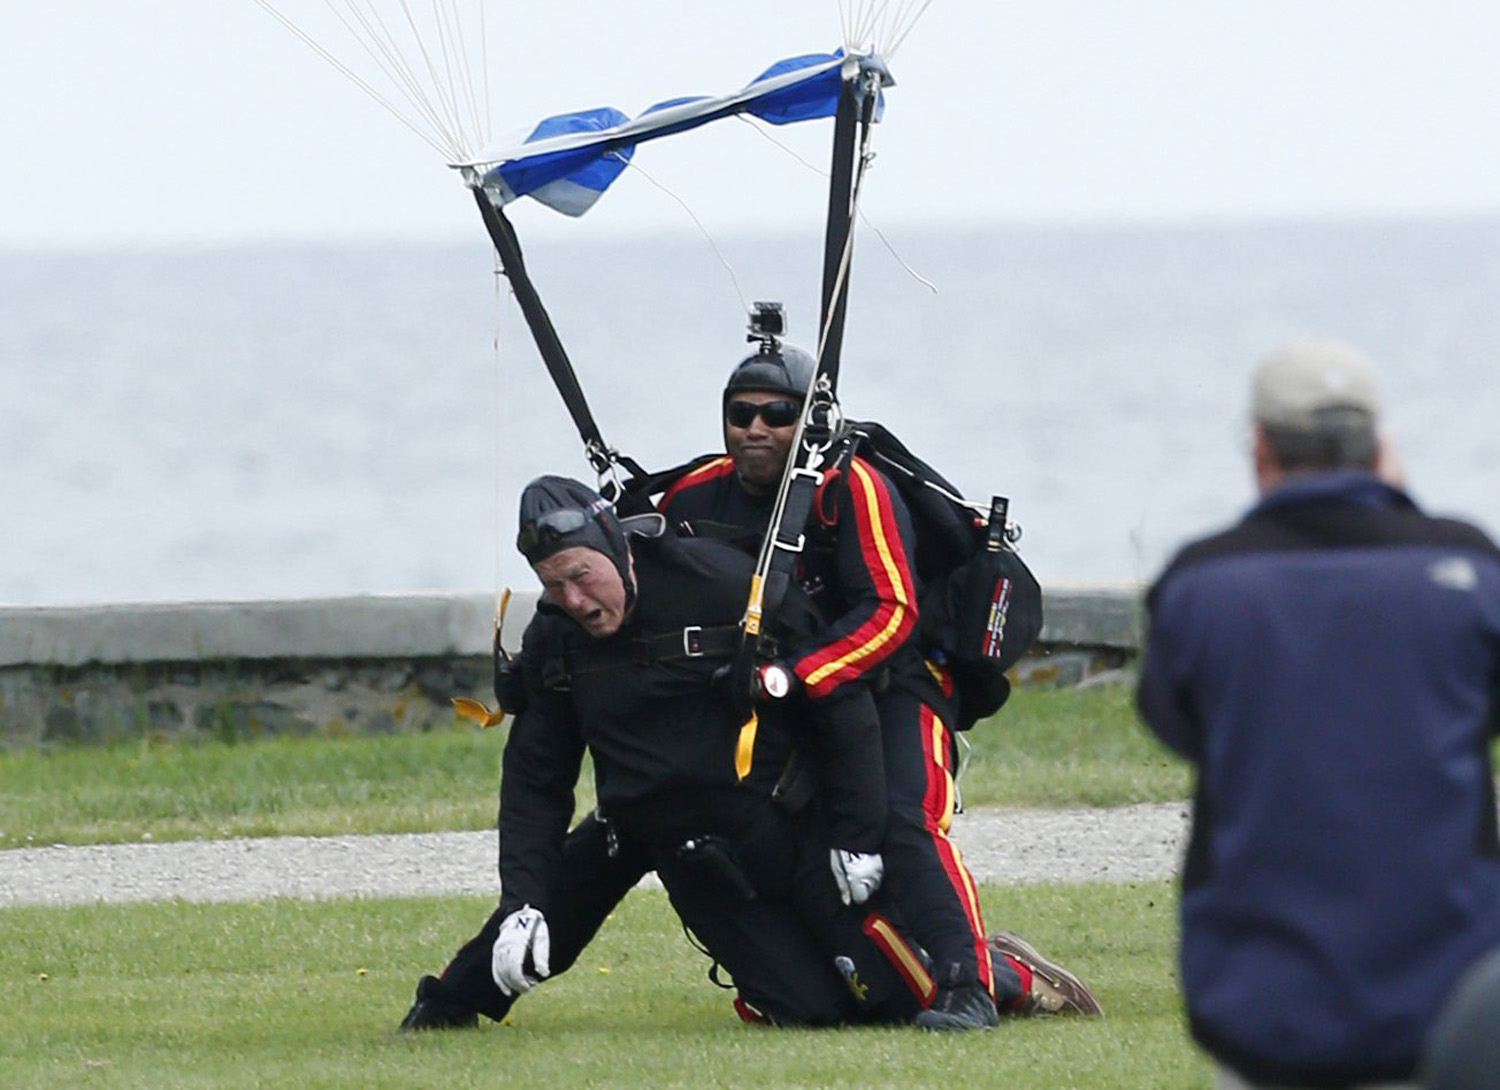 Former President George H.W. Bush, left, strapped to Sgt. 1st Class Mike Elliott, a retired member of the Army's Golden Knights parachute team, land on the lawn at St. Anne's Episcopal Church after making a tandem parachute jump to celebrate Bush's 90th birthday near his summer home in Kennebunkport, Maine, June 12, 2014.